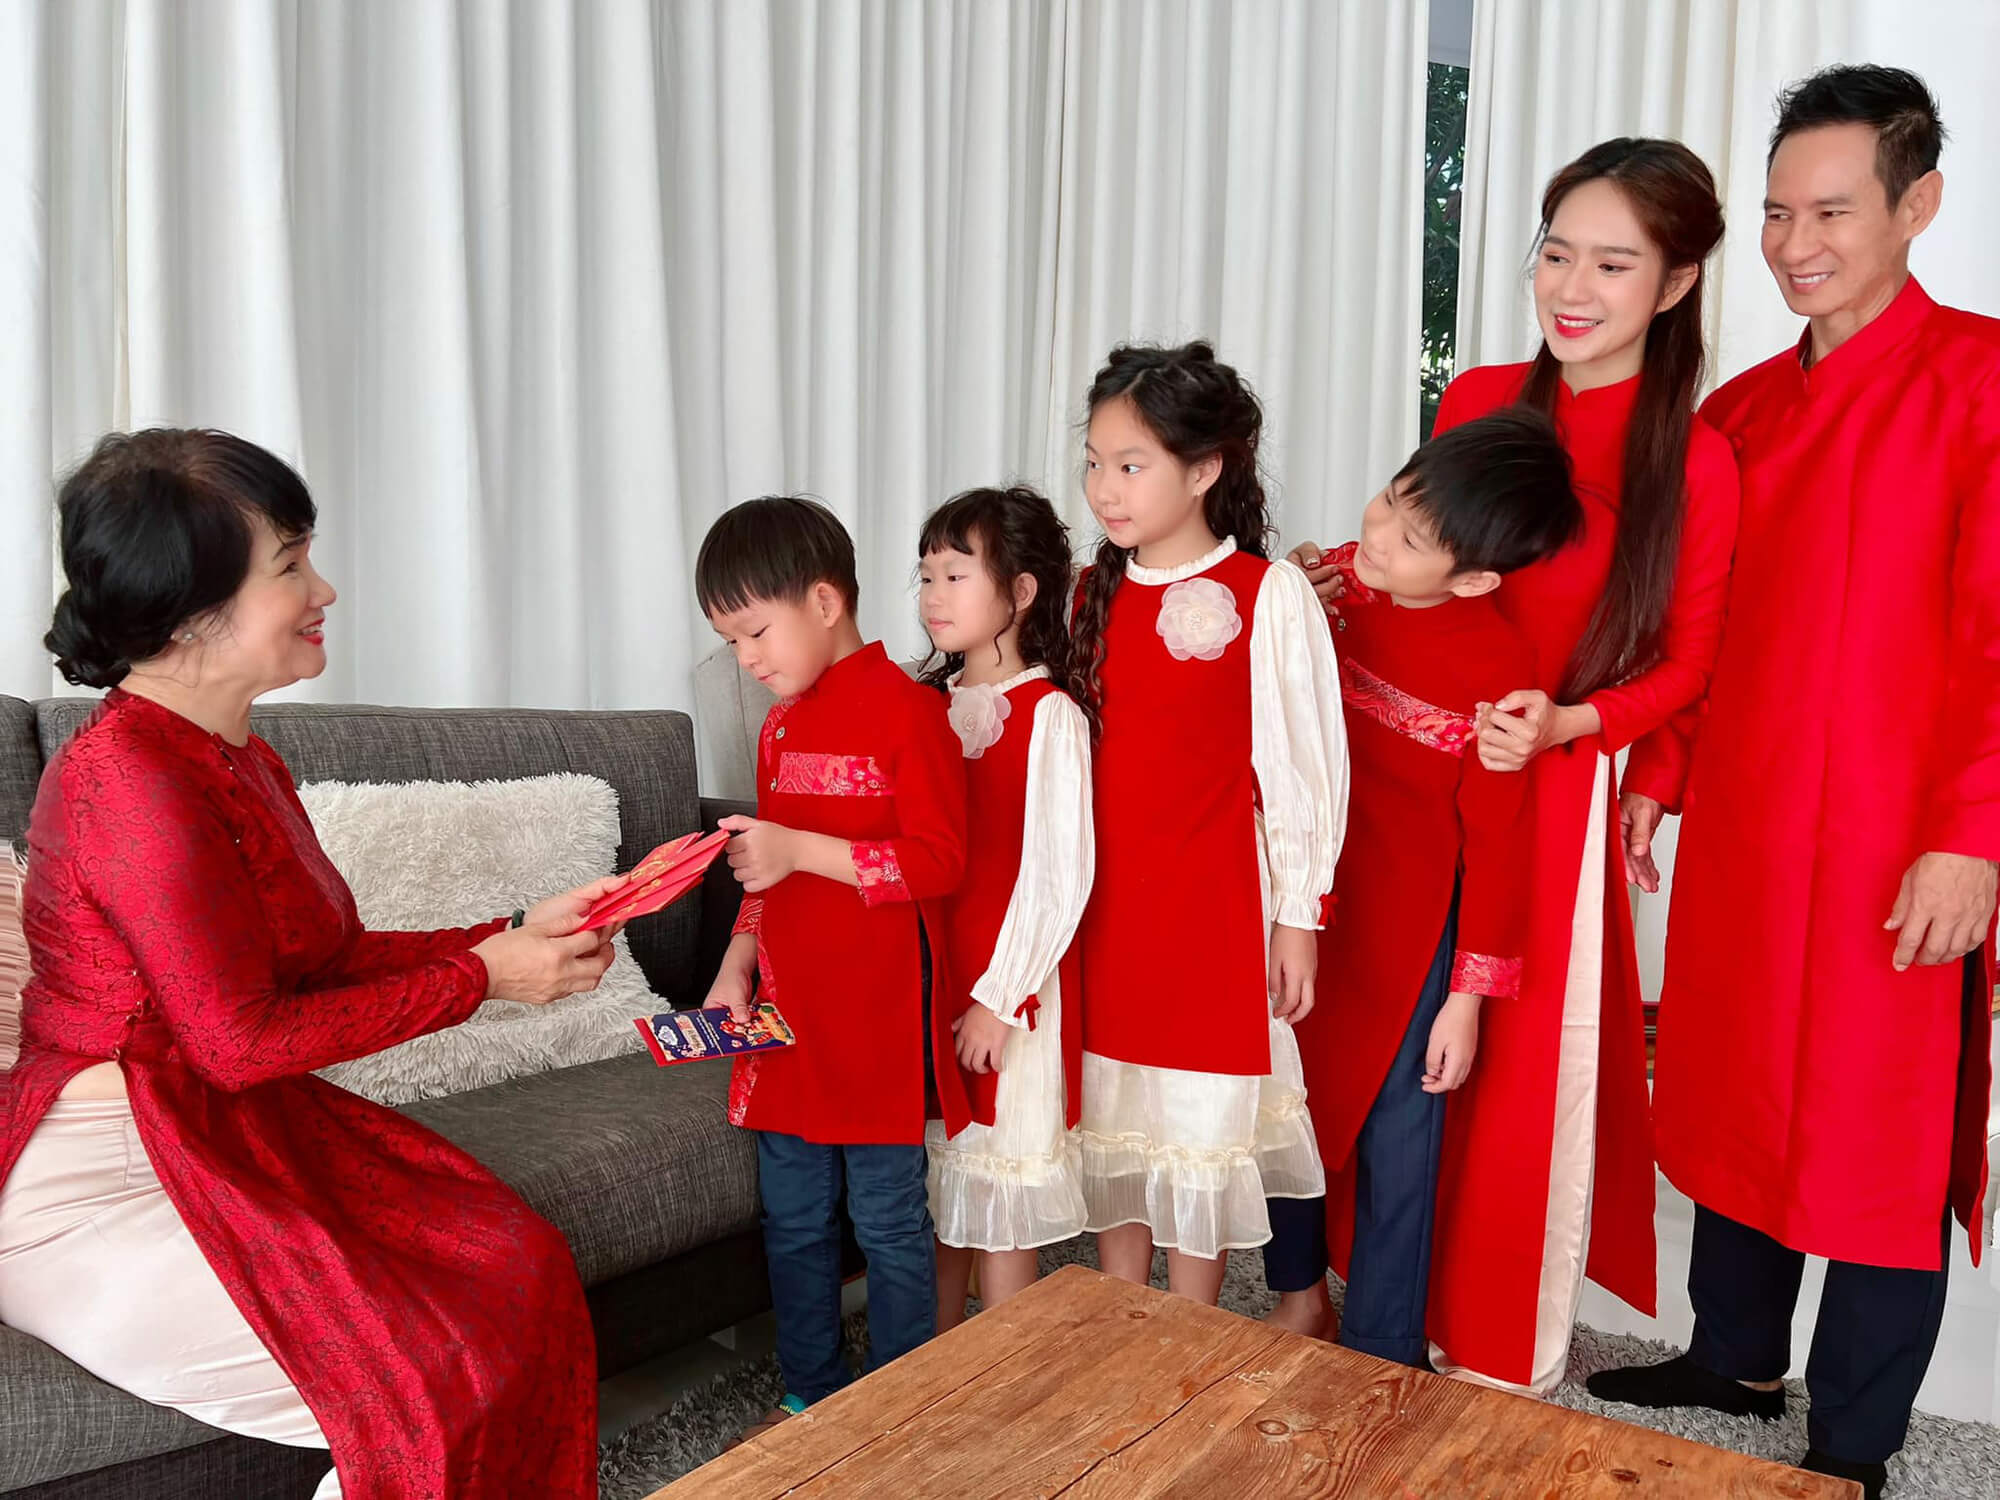 Adults often give red envelopes to children